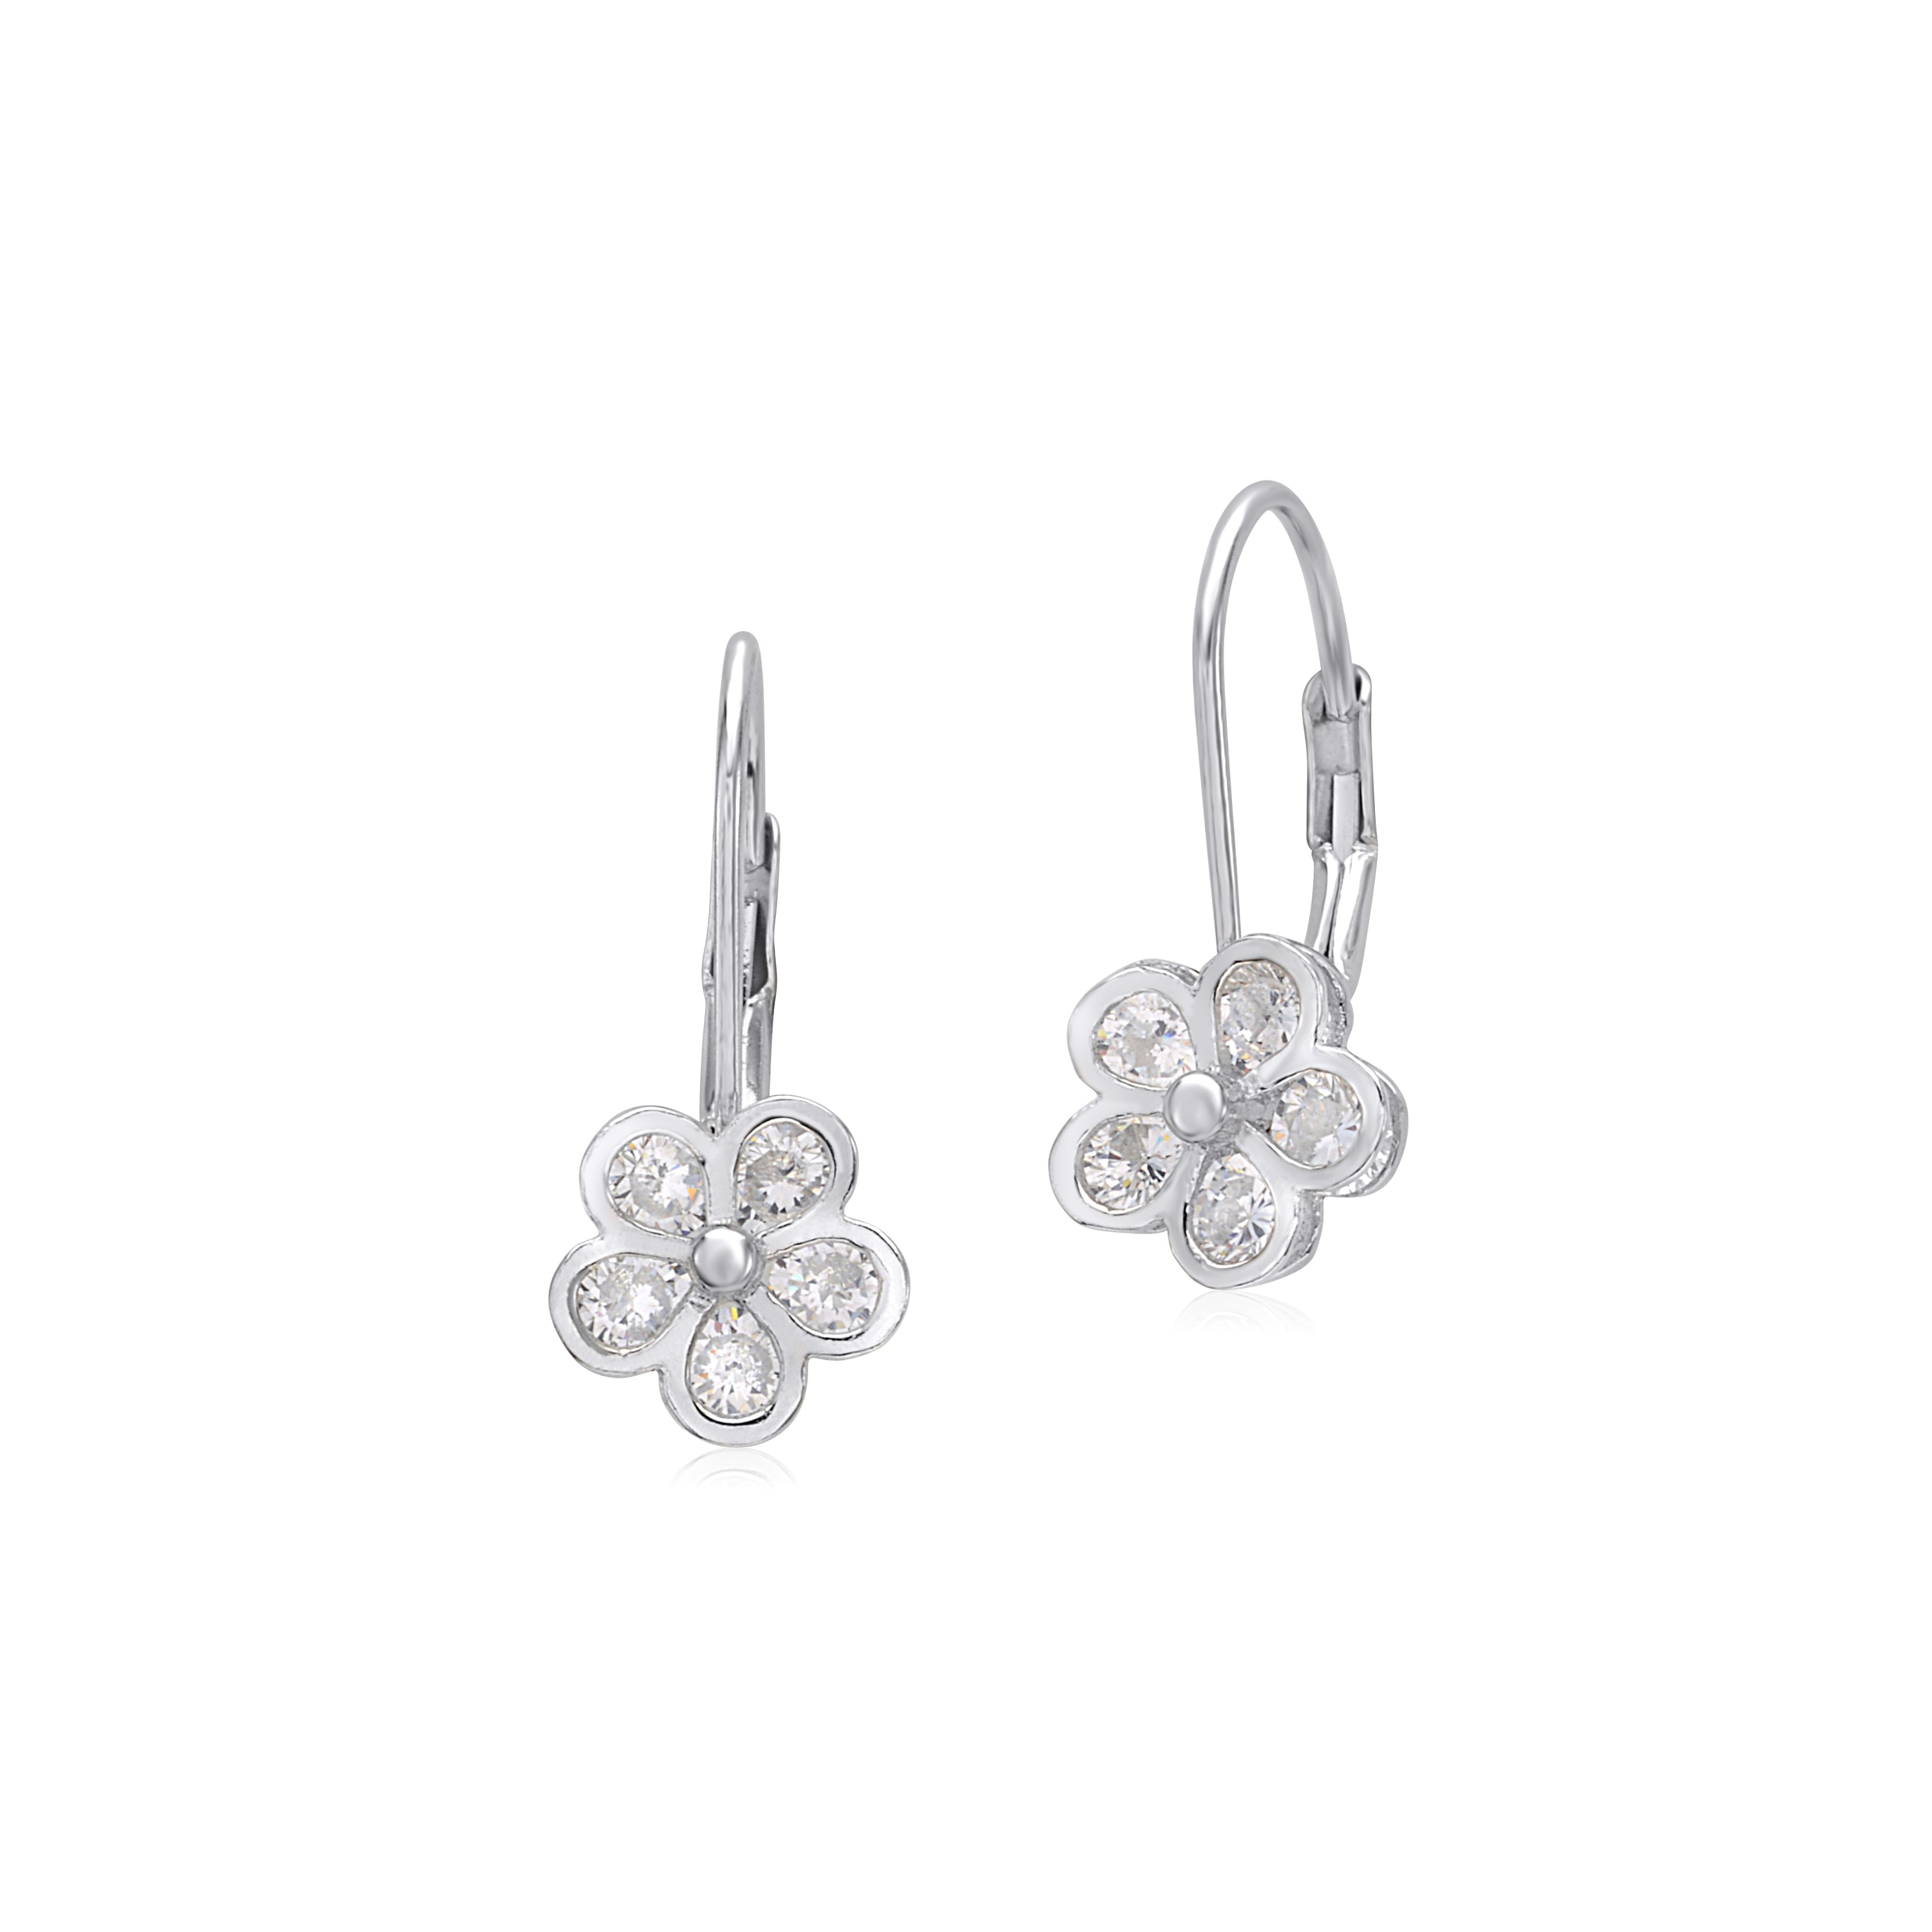 Sterling Silver 925 Leverback Earrings 5 Petal Flower with Cubic Zirconia Italy